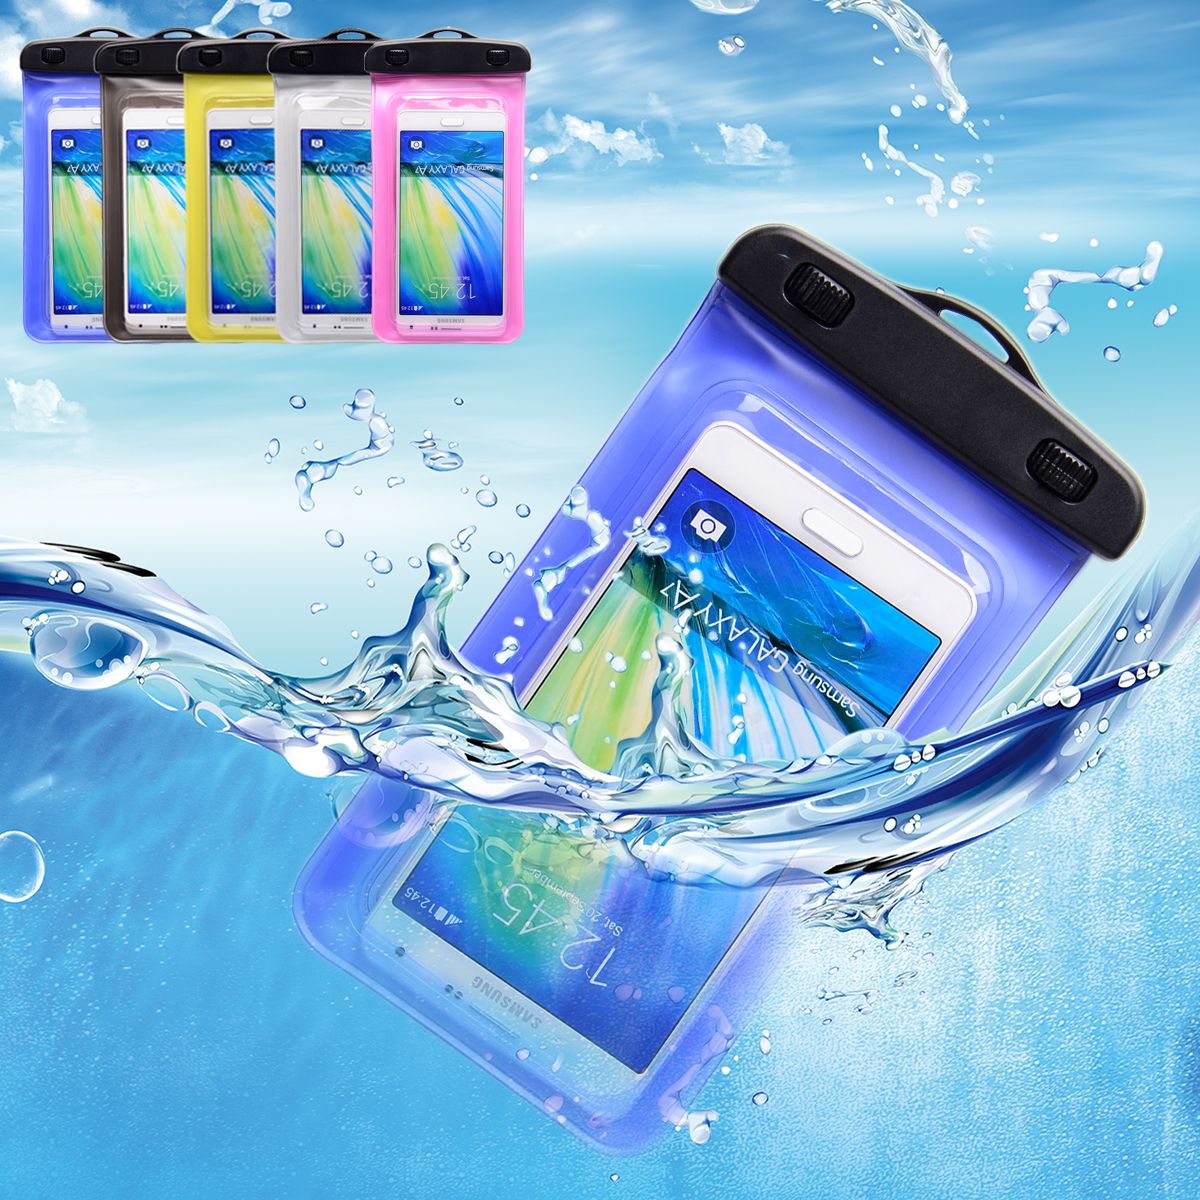 6-Inch-Floatable-Waterproof-Phone-Case-IPX8-Waterproof-Phone-Pouch-Dry-Bag-for-Any-Phone-in-6inch-1630570